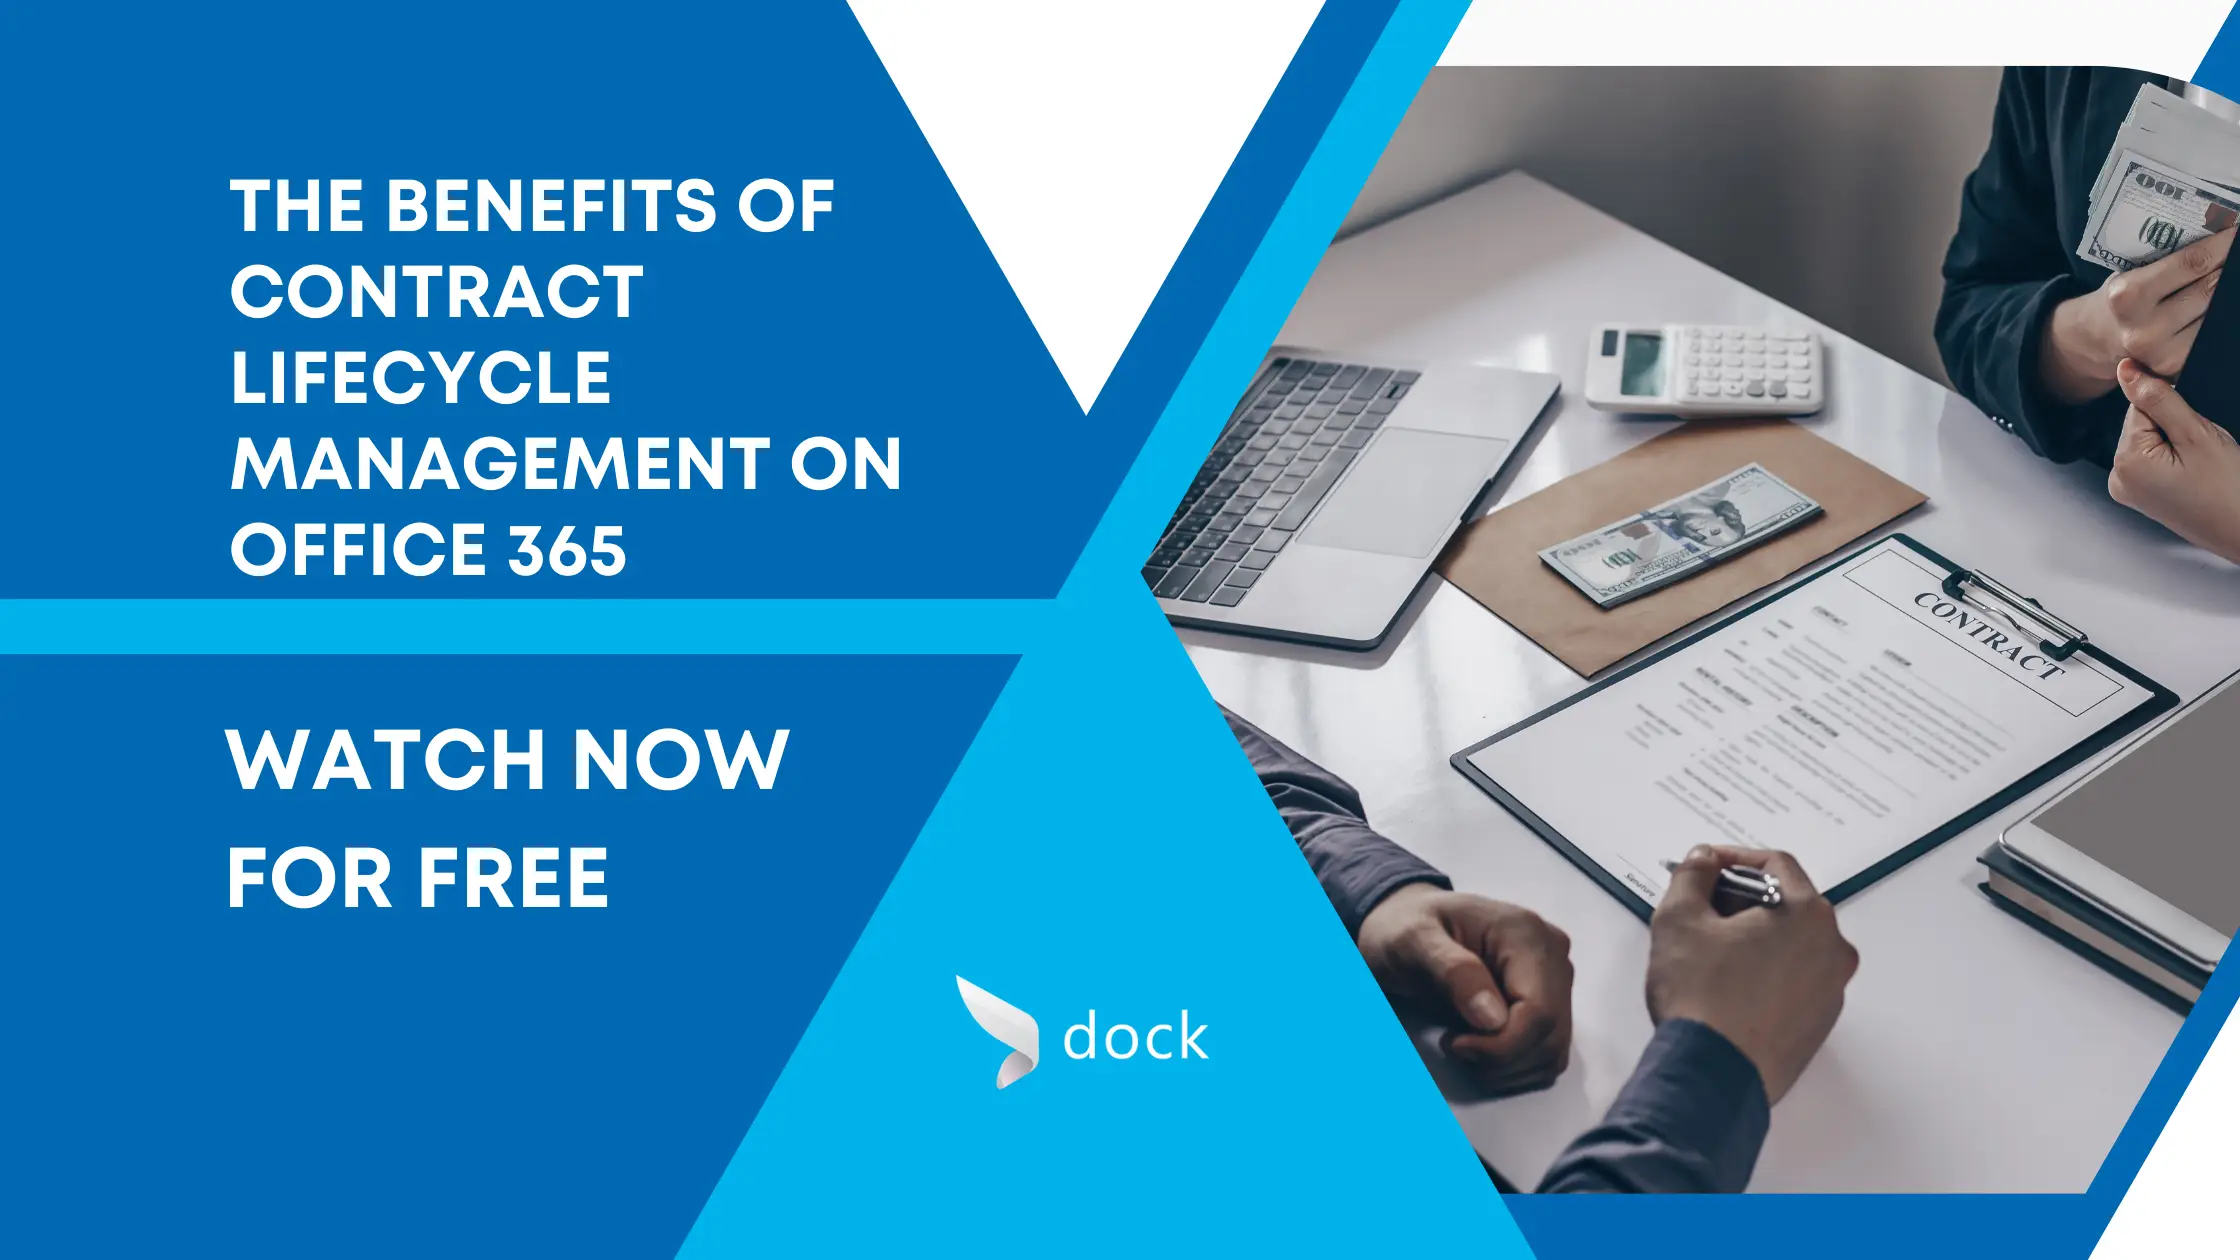 Webinar - The Benefits of Contract Lifecycle Management on Office 365